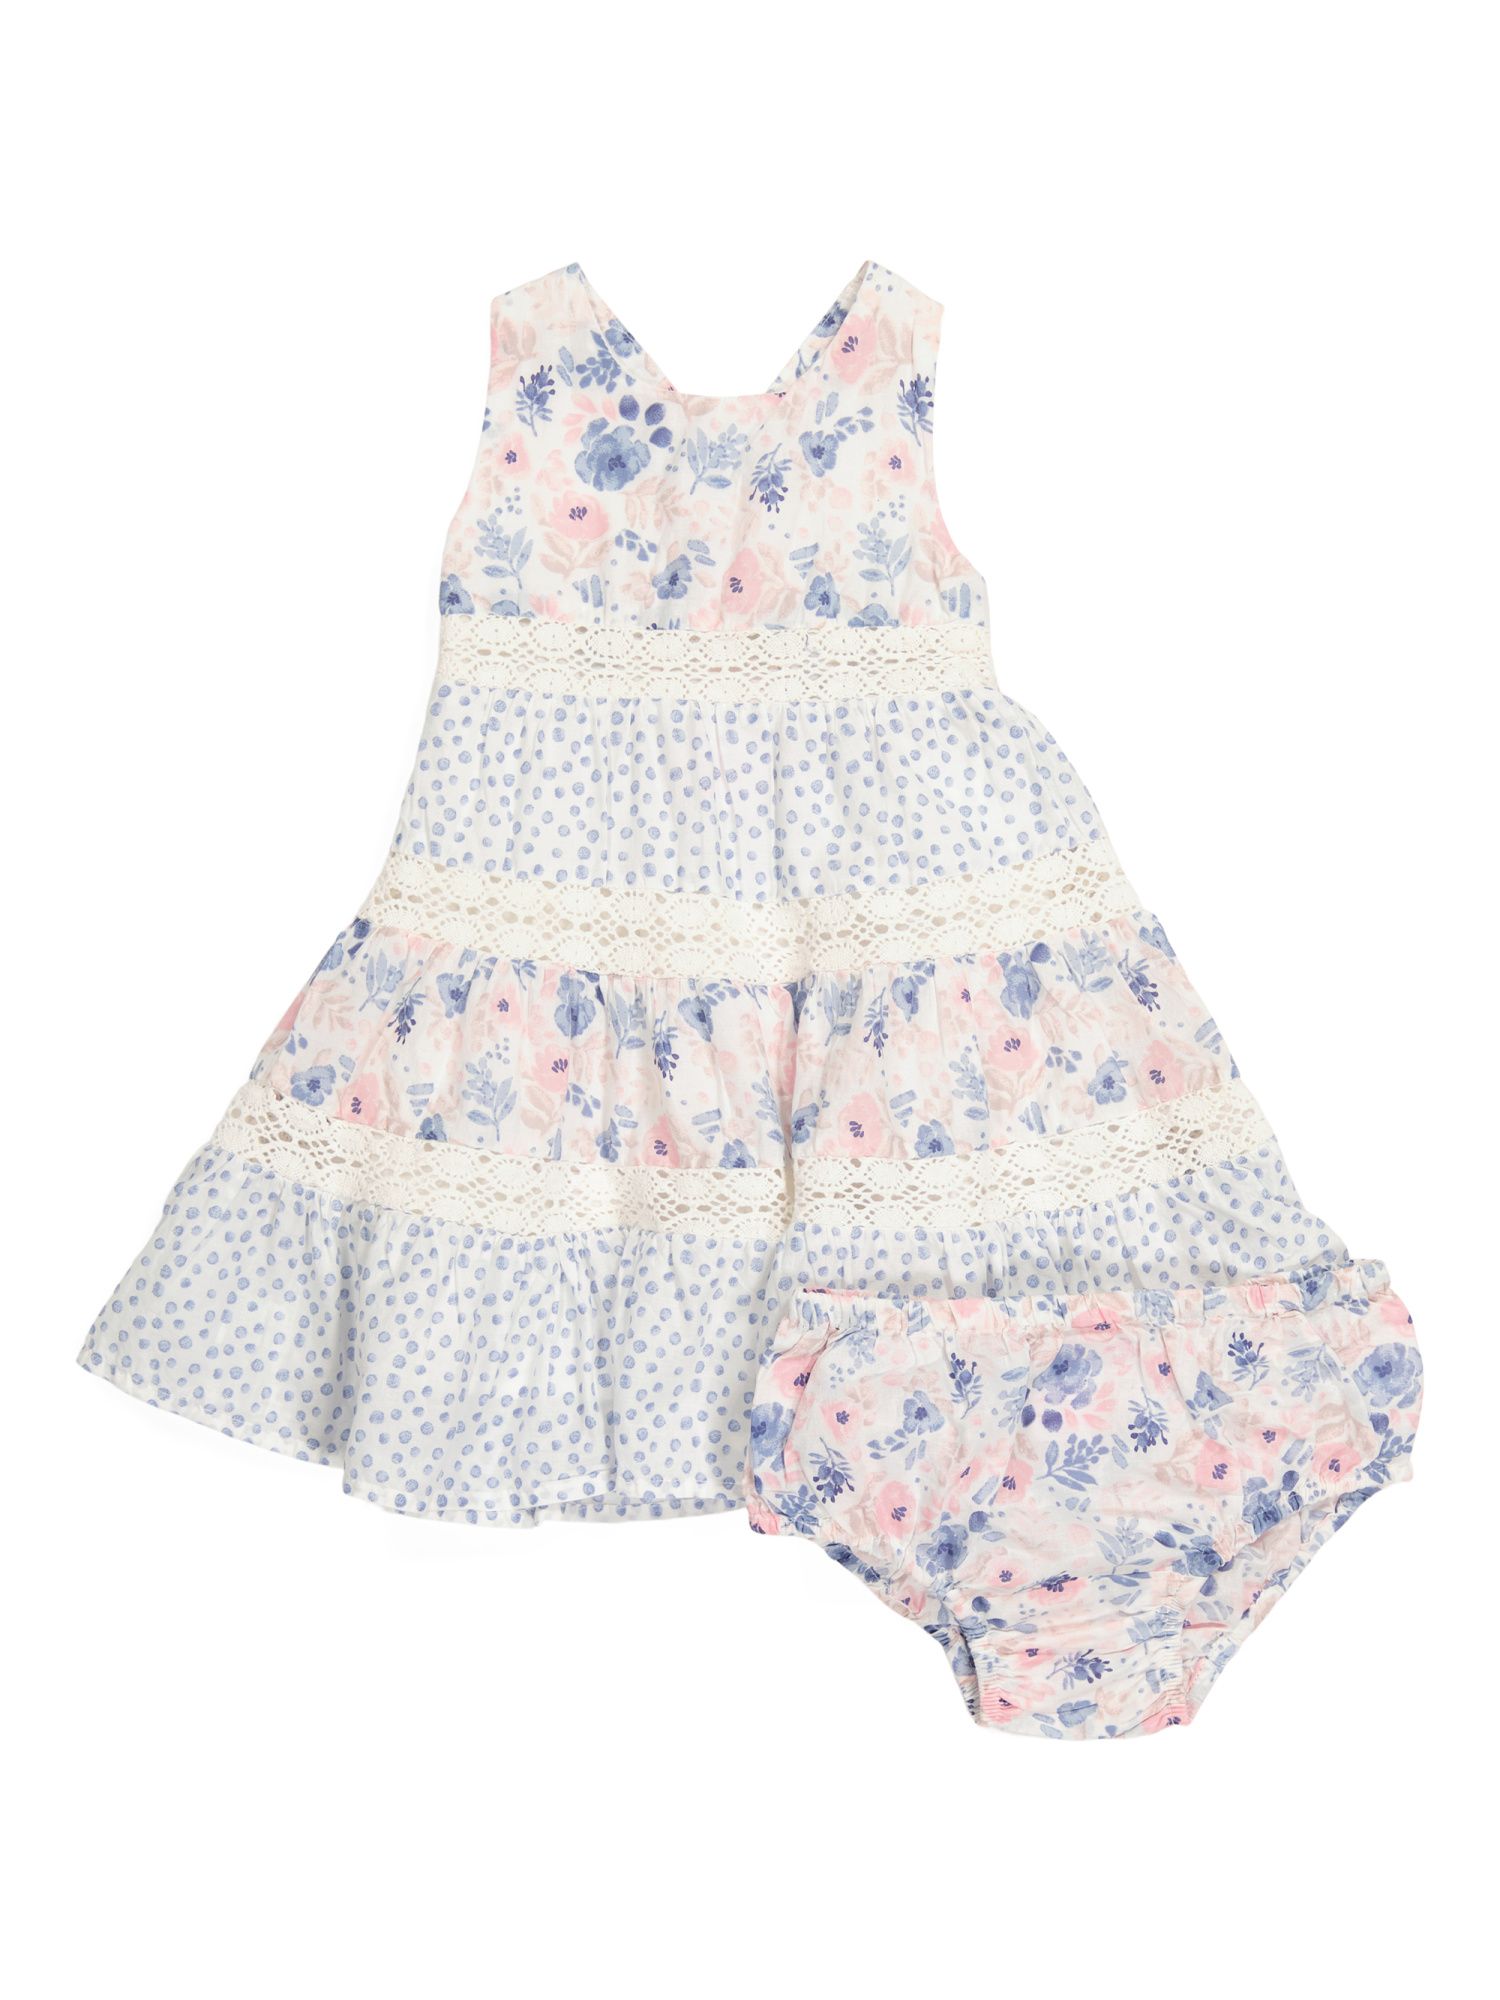 Infant Girls Criss Cross Tiered Dress With Bloomers | TJ Maxx